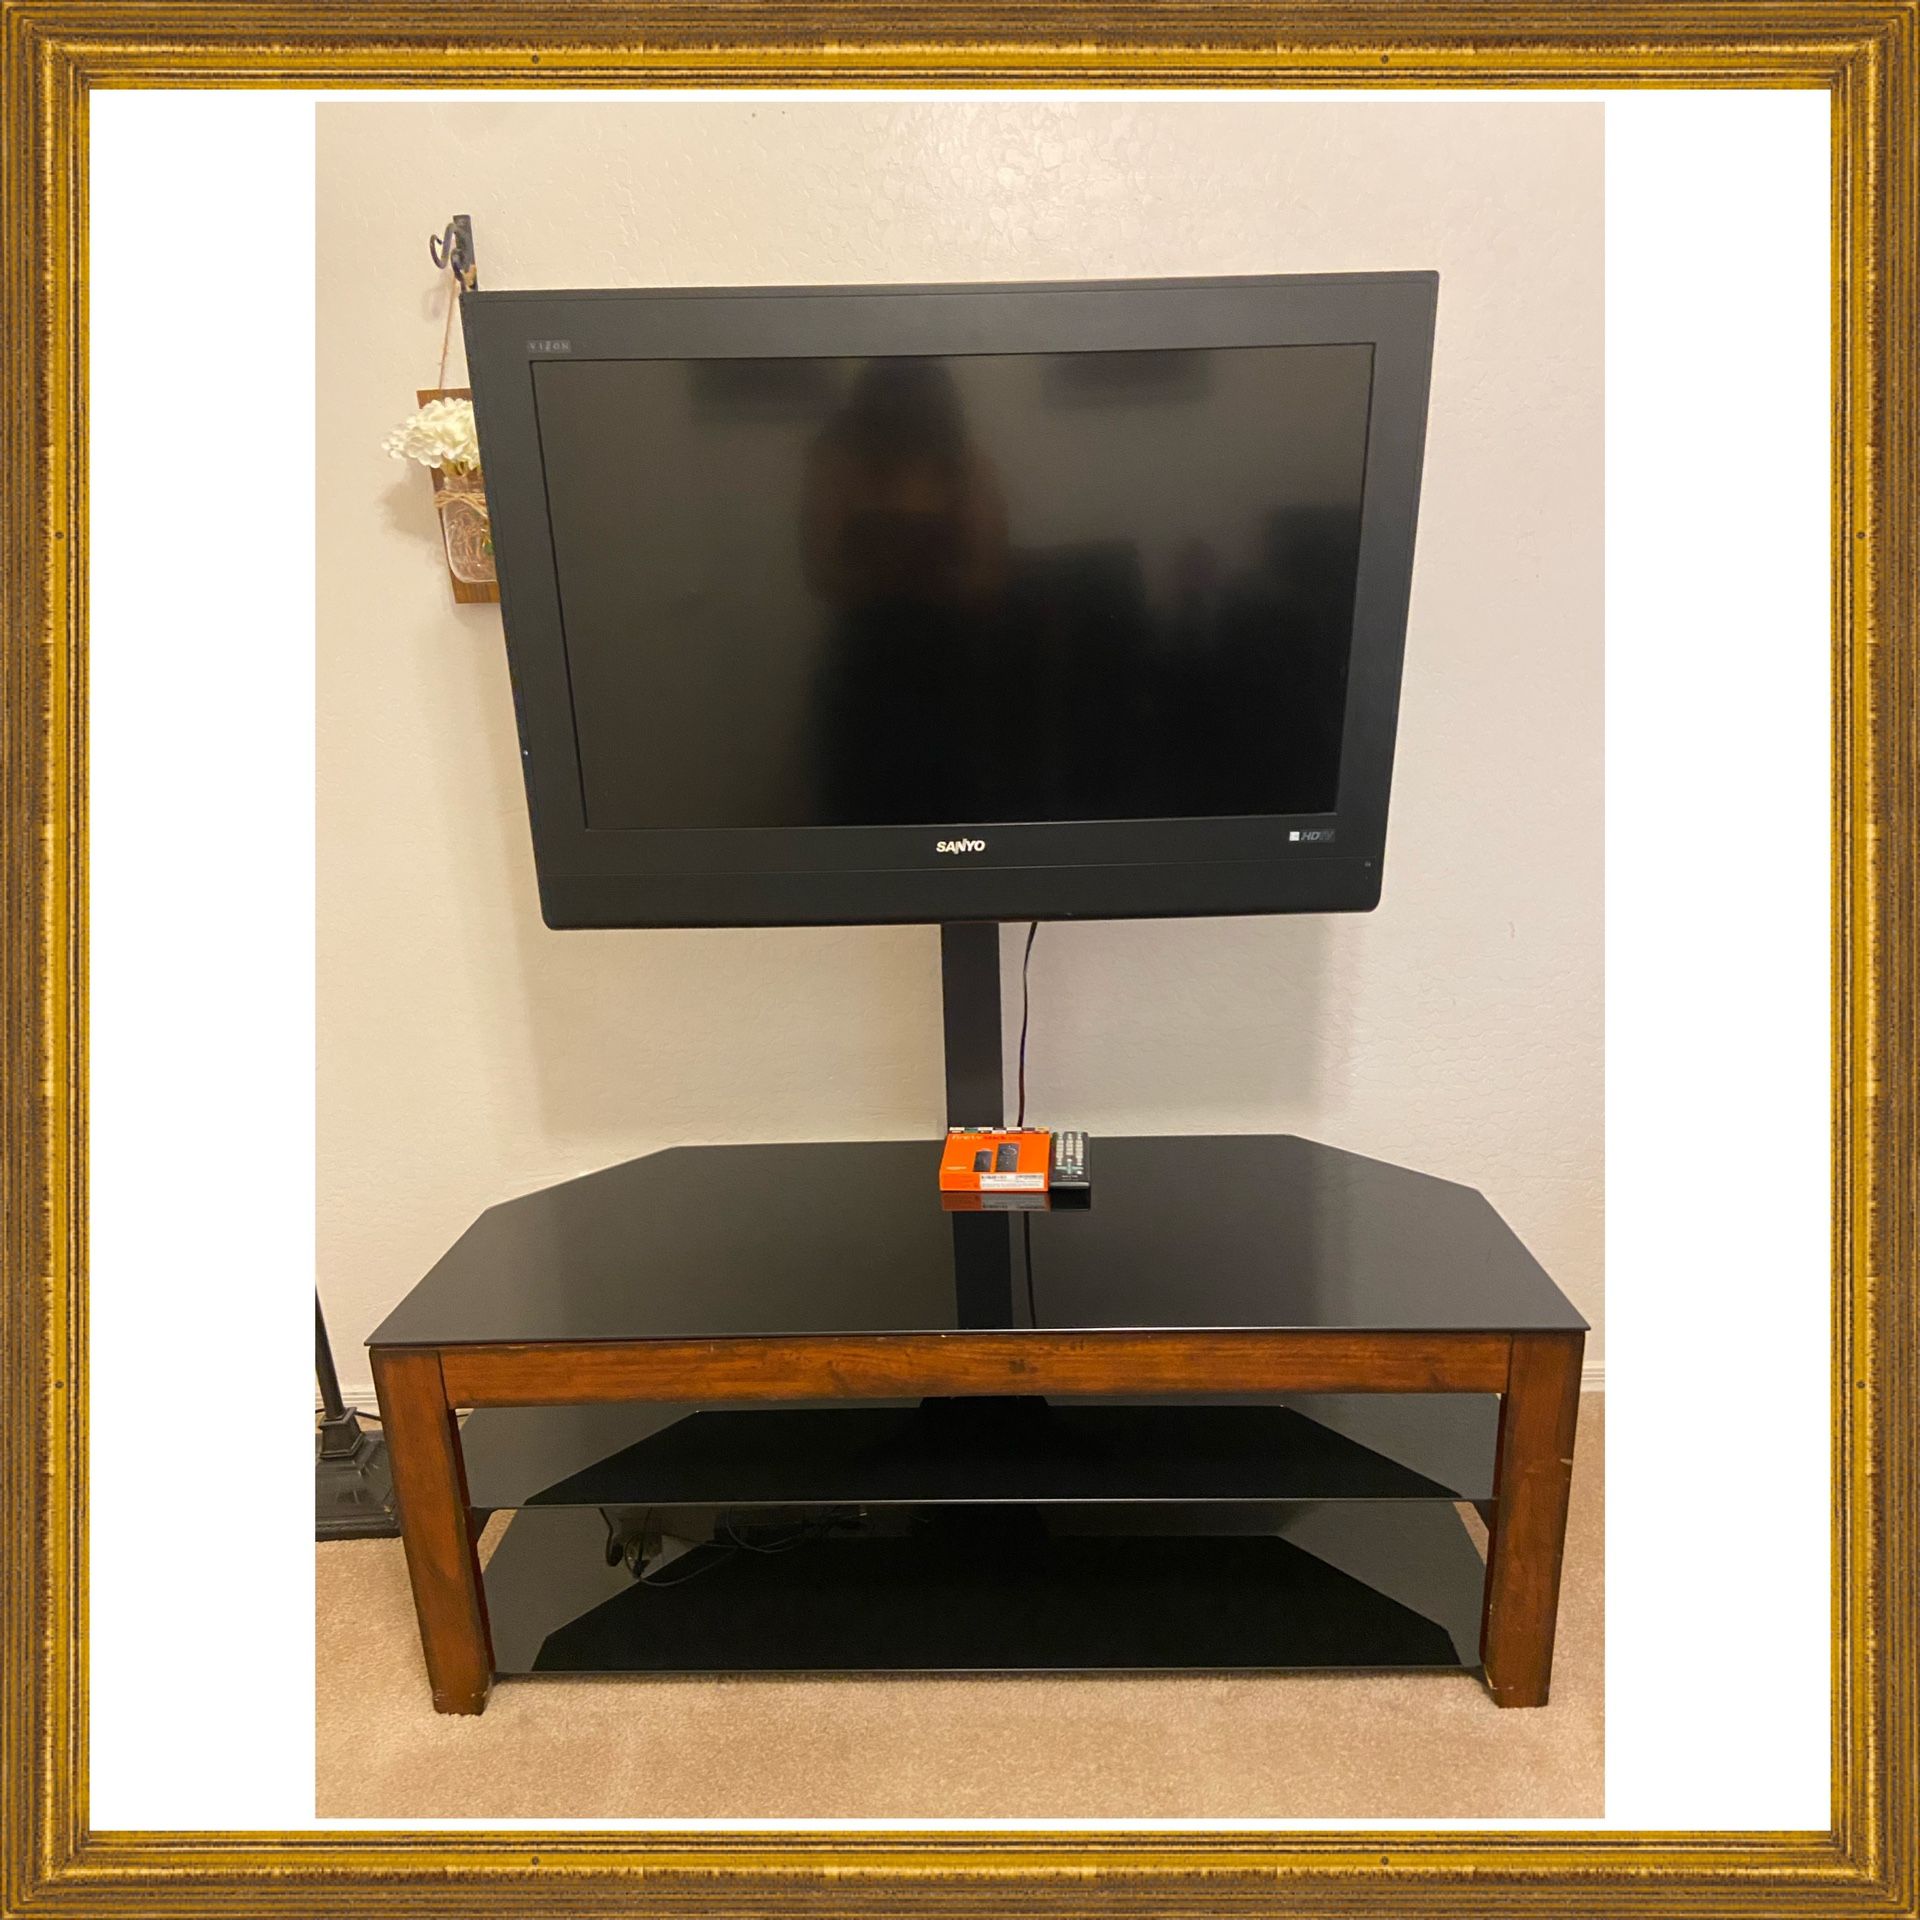 TV WITH  STAND .  32 INCH SANYO TV STAND HAS NEXK THAT HOLDS TV AND ROTATES LEFT TO RIGHT. STAND HAS 2 SHELVES.  